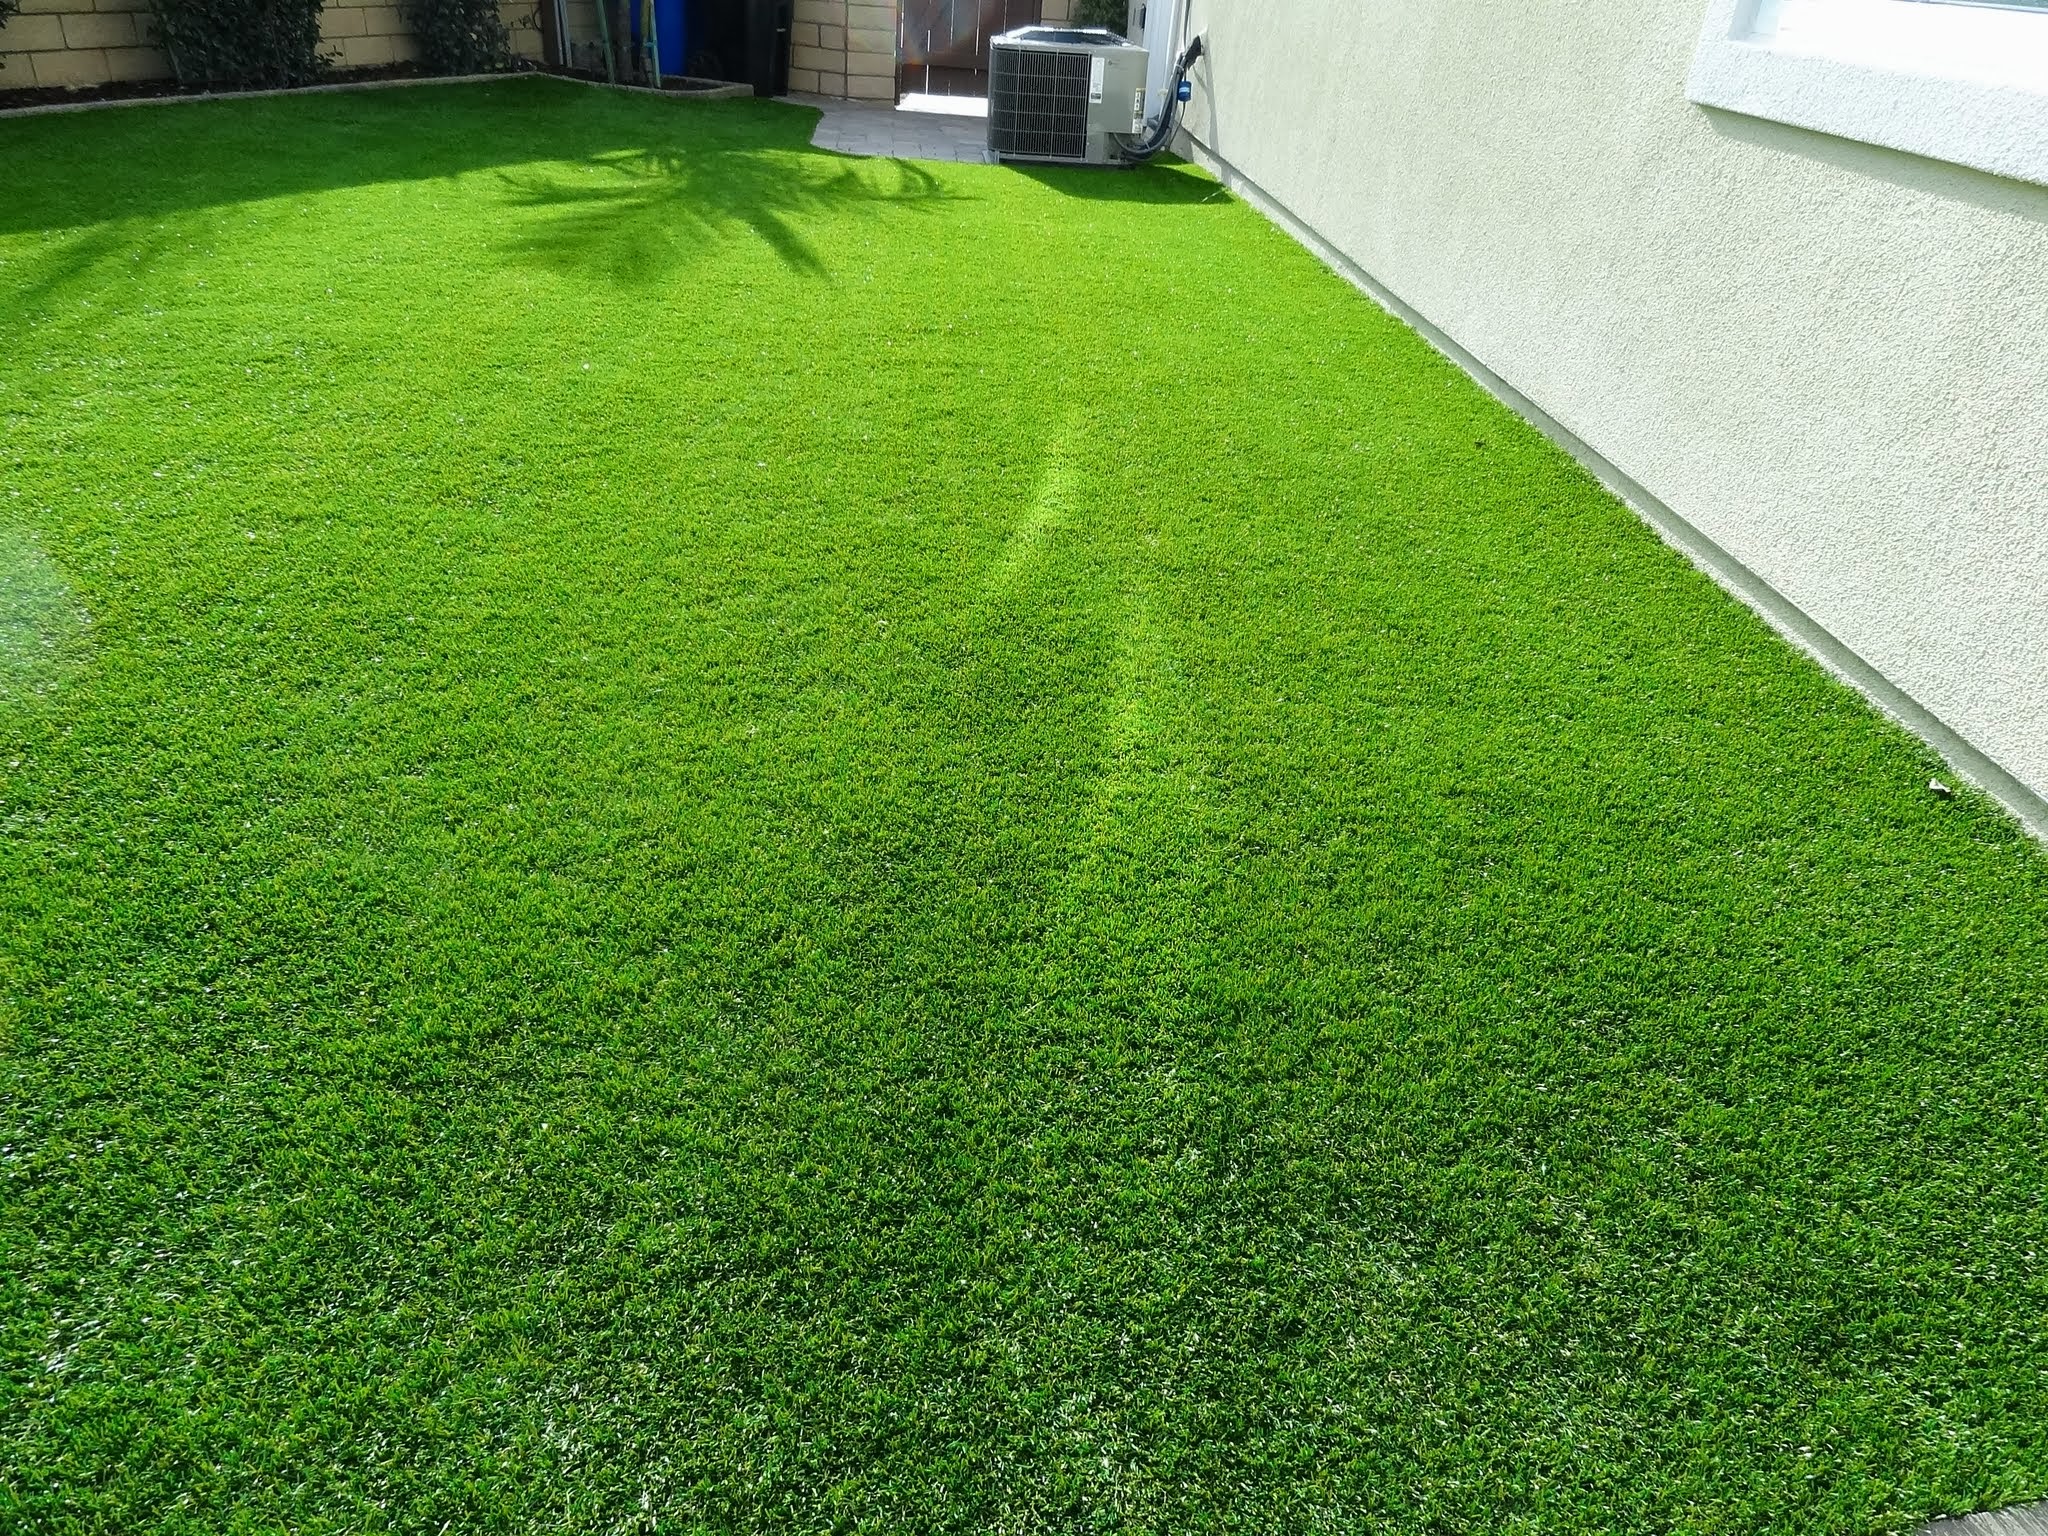 What Factors Should I Consider When Selecting the Best Grass Carpet for My Home?